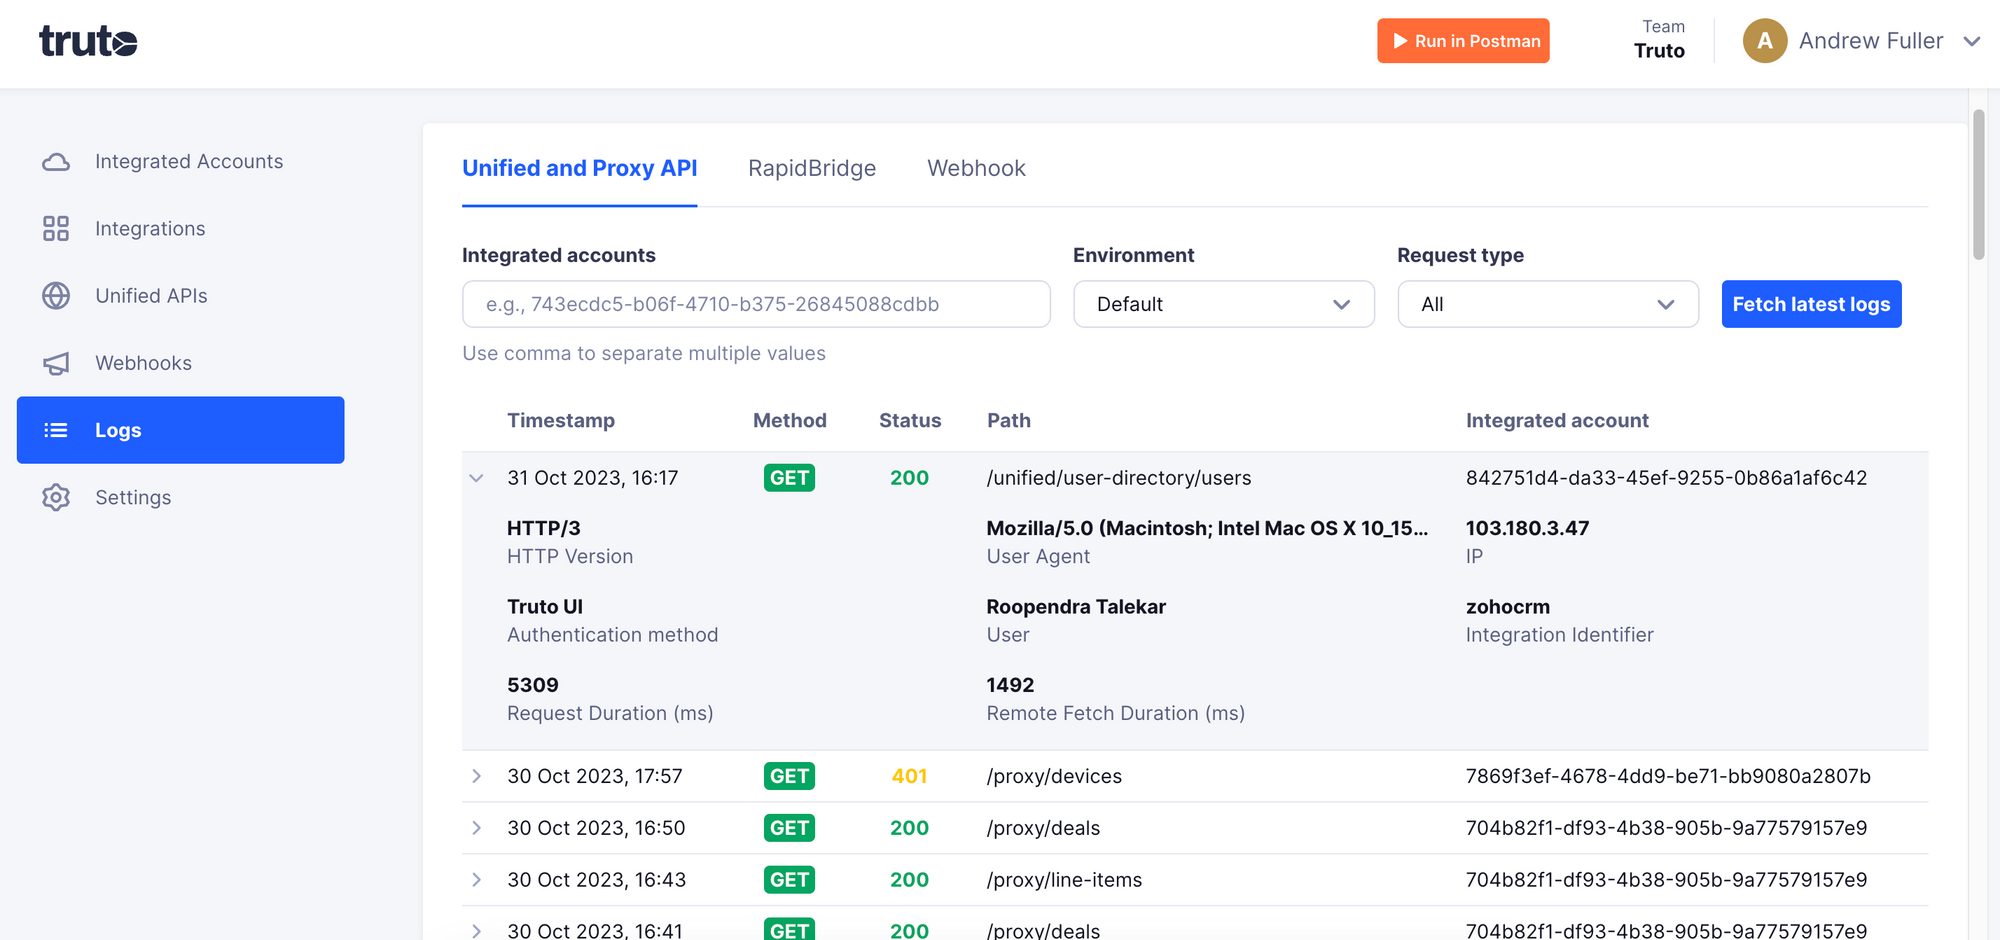 Truto detailed logging of all API requests